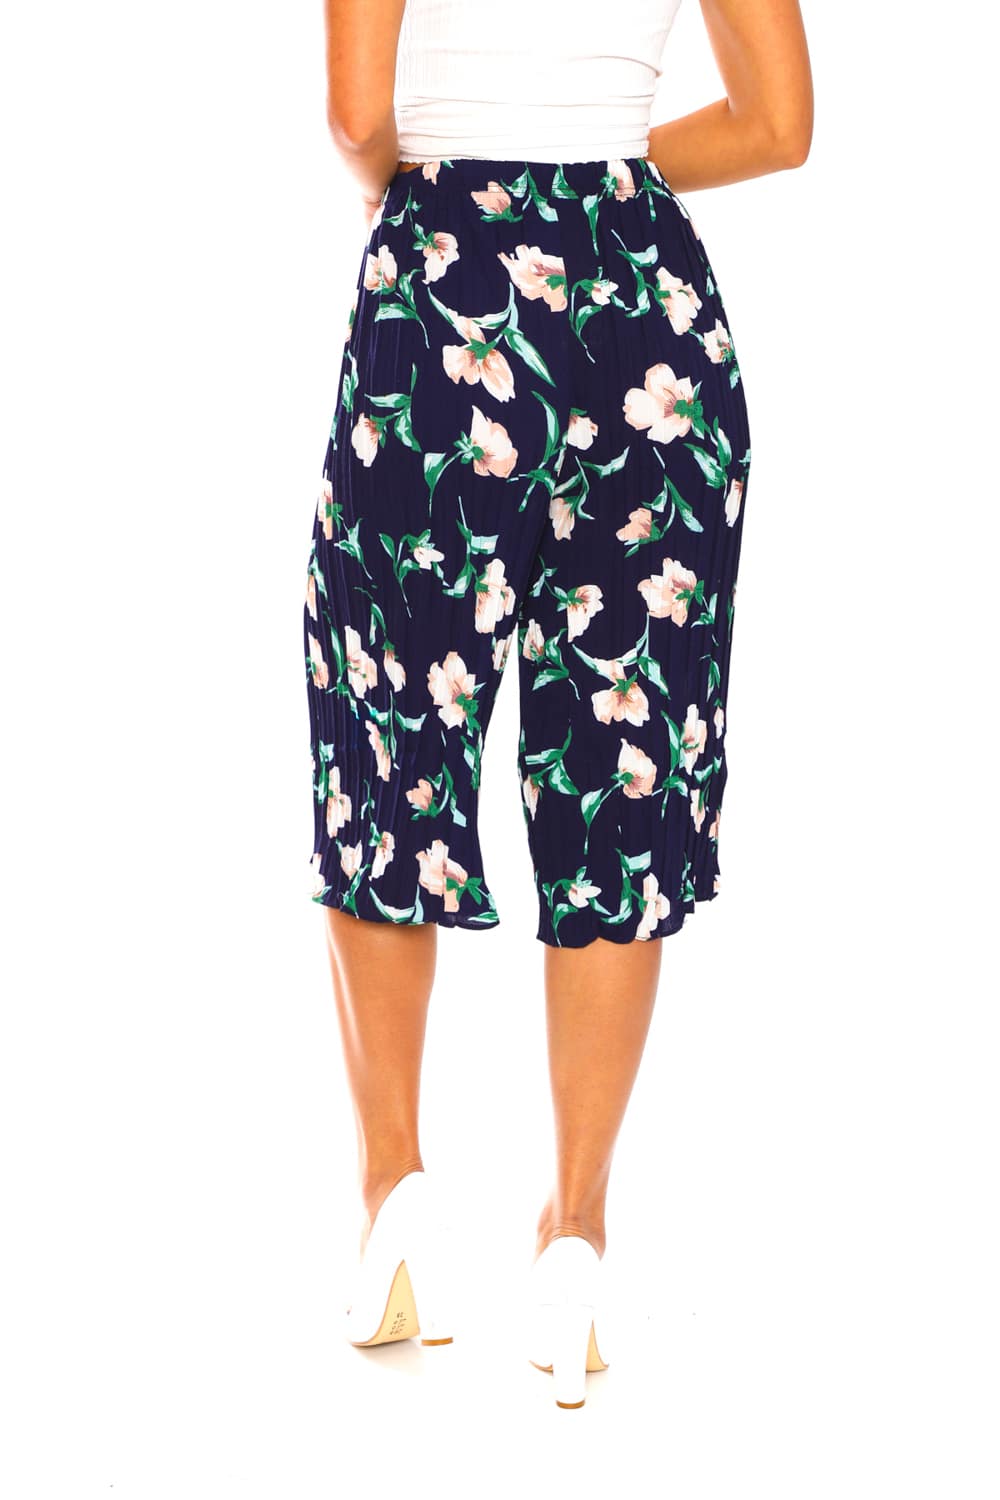 Floral Print Pants with Green Leaves - 3